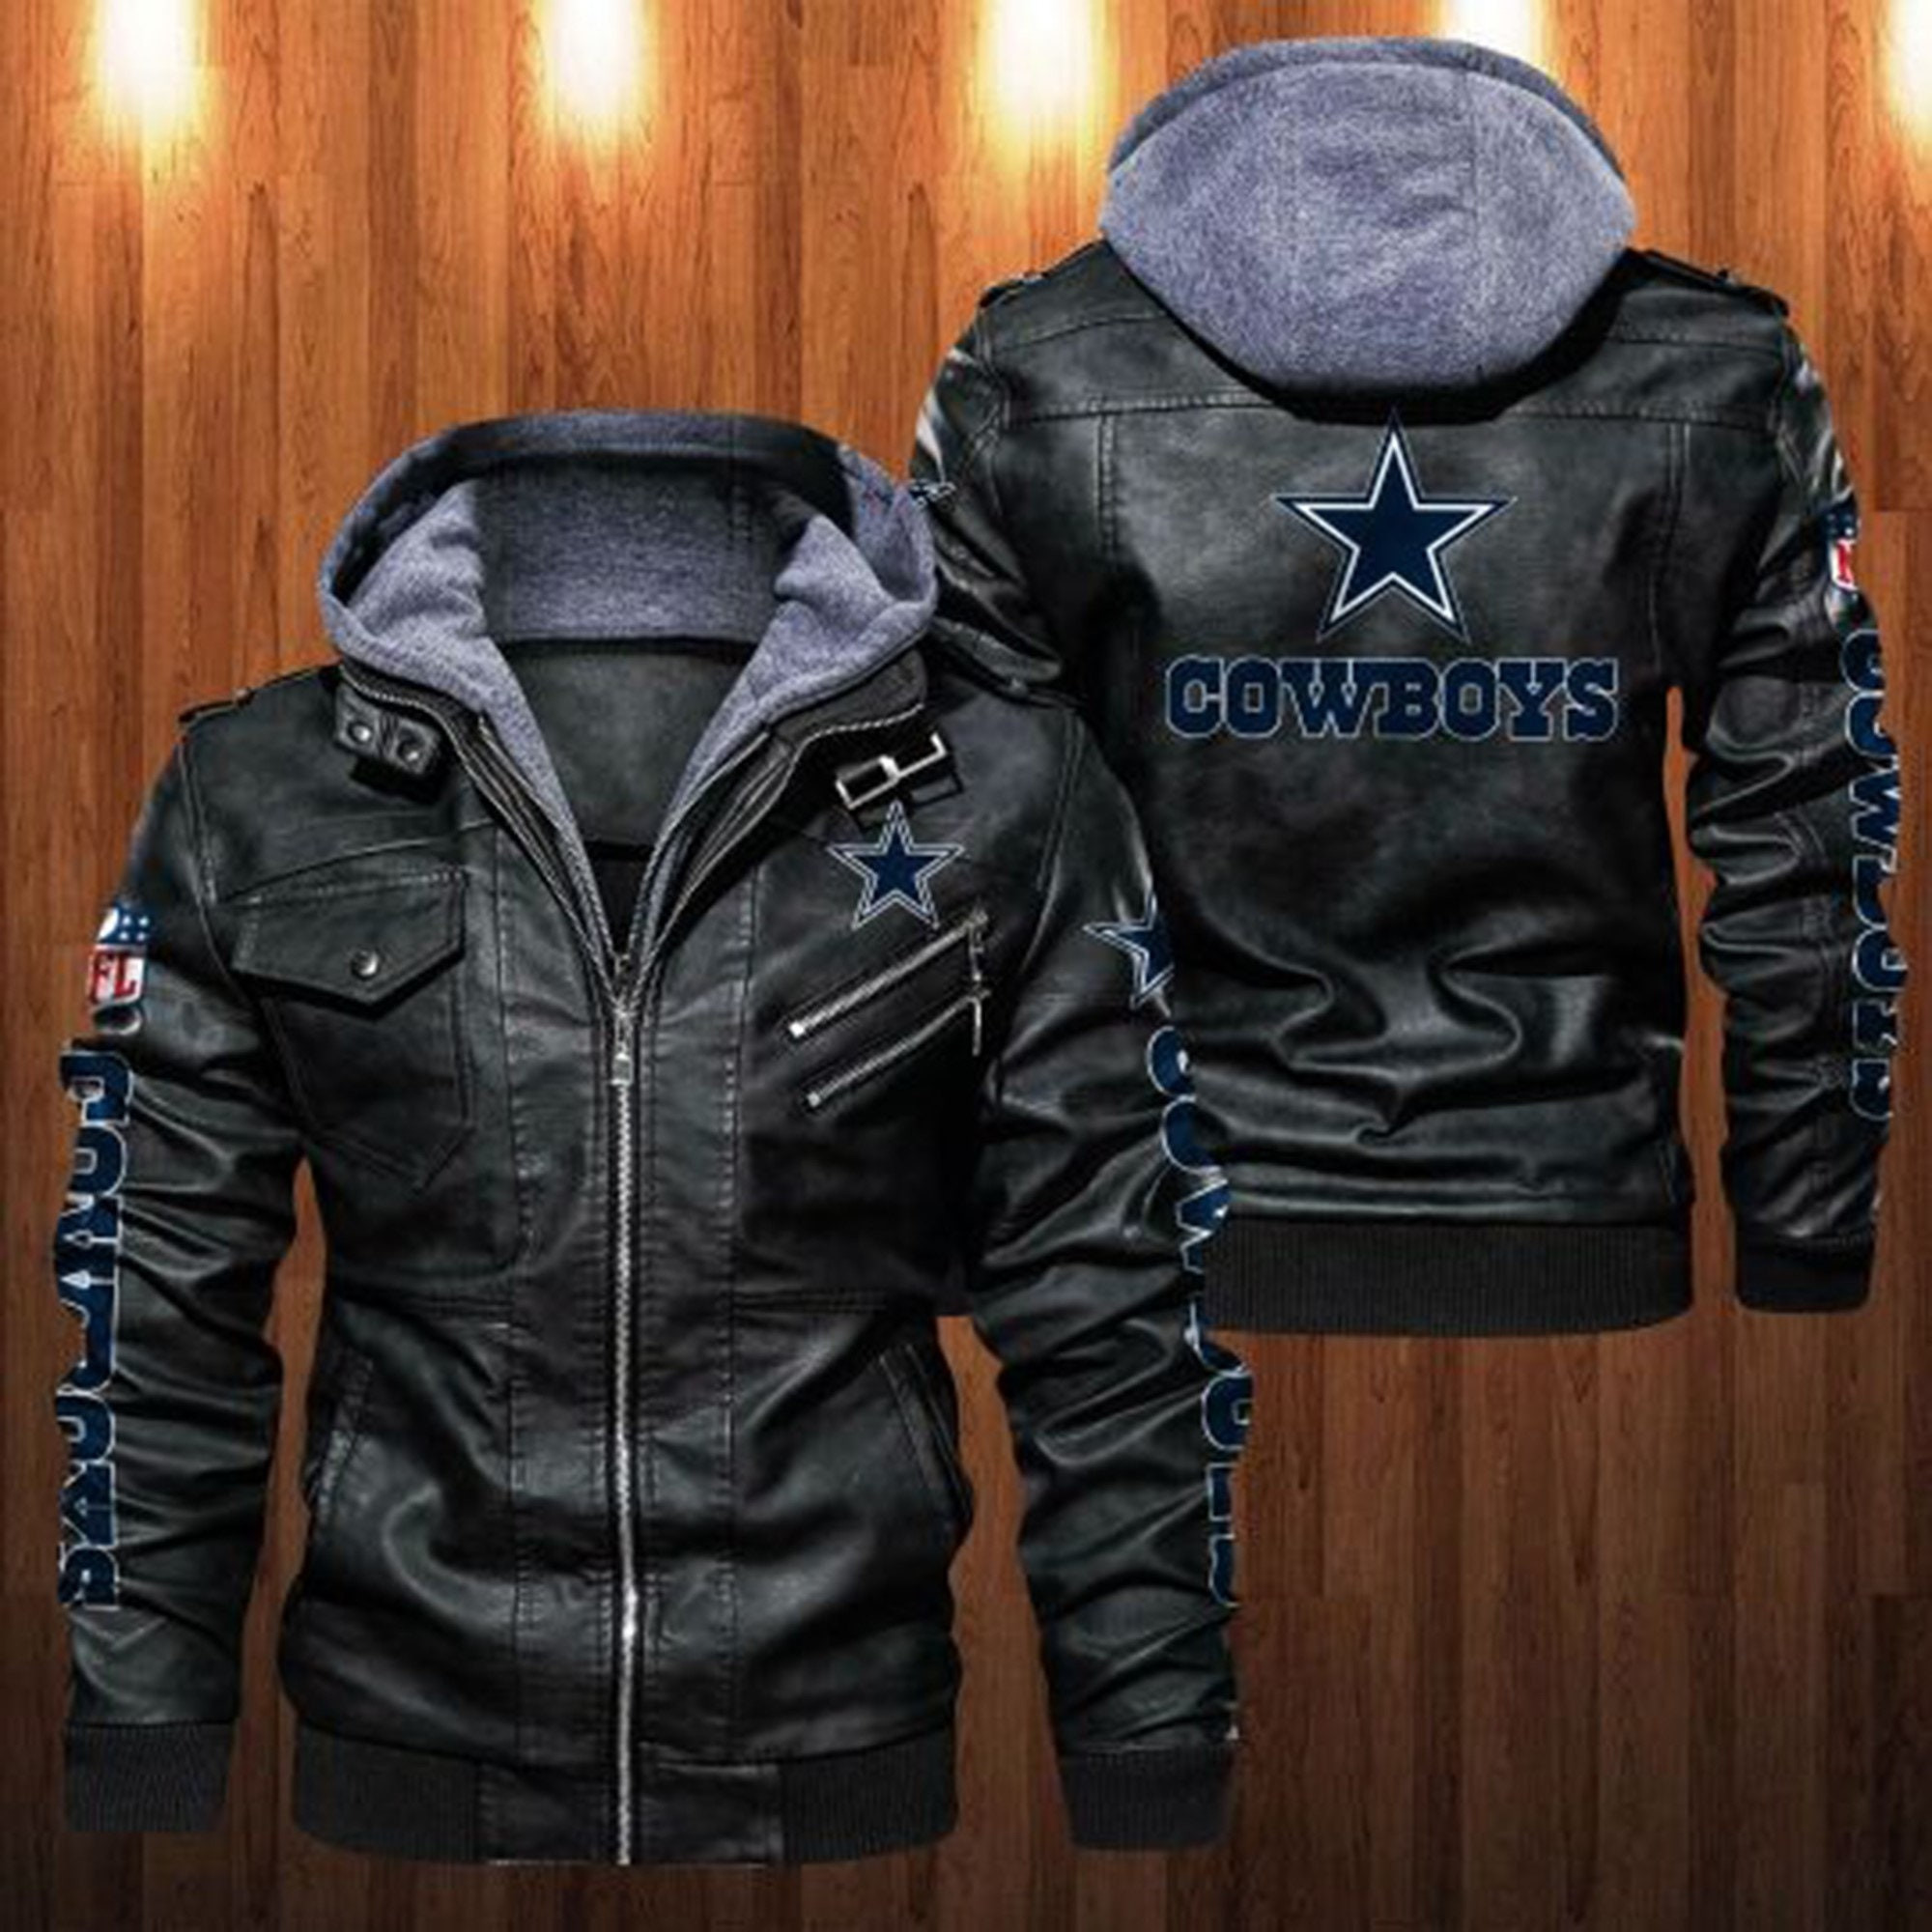 These Amazing Leather Jacket will add to the appeal of your outfit 91